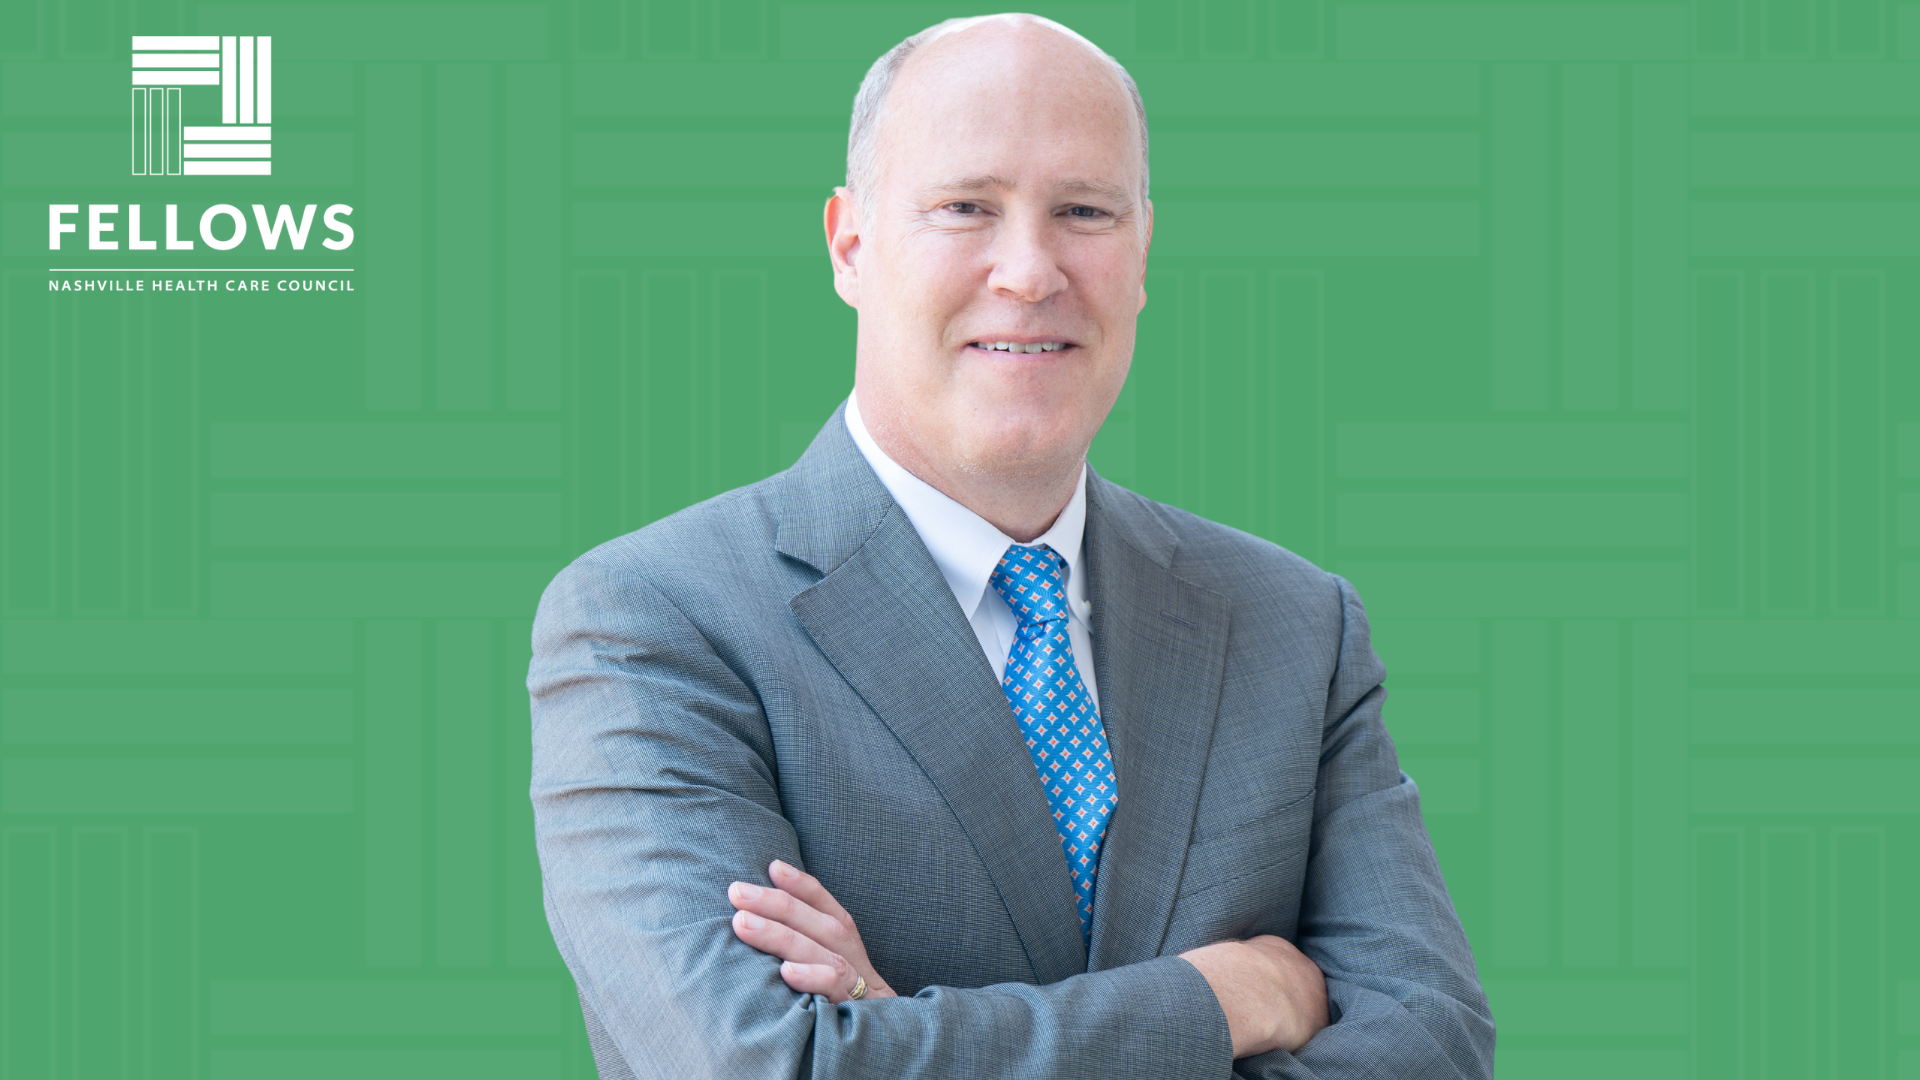 Morgan Wills, a man in a business suit with a blue tie stands with arms crossed in front of a green background, featuring the "Nashville Health Care Council Fellows" logo 